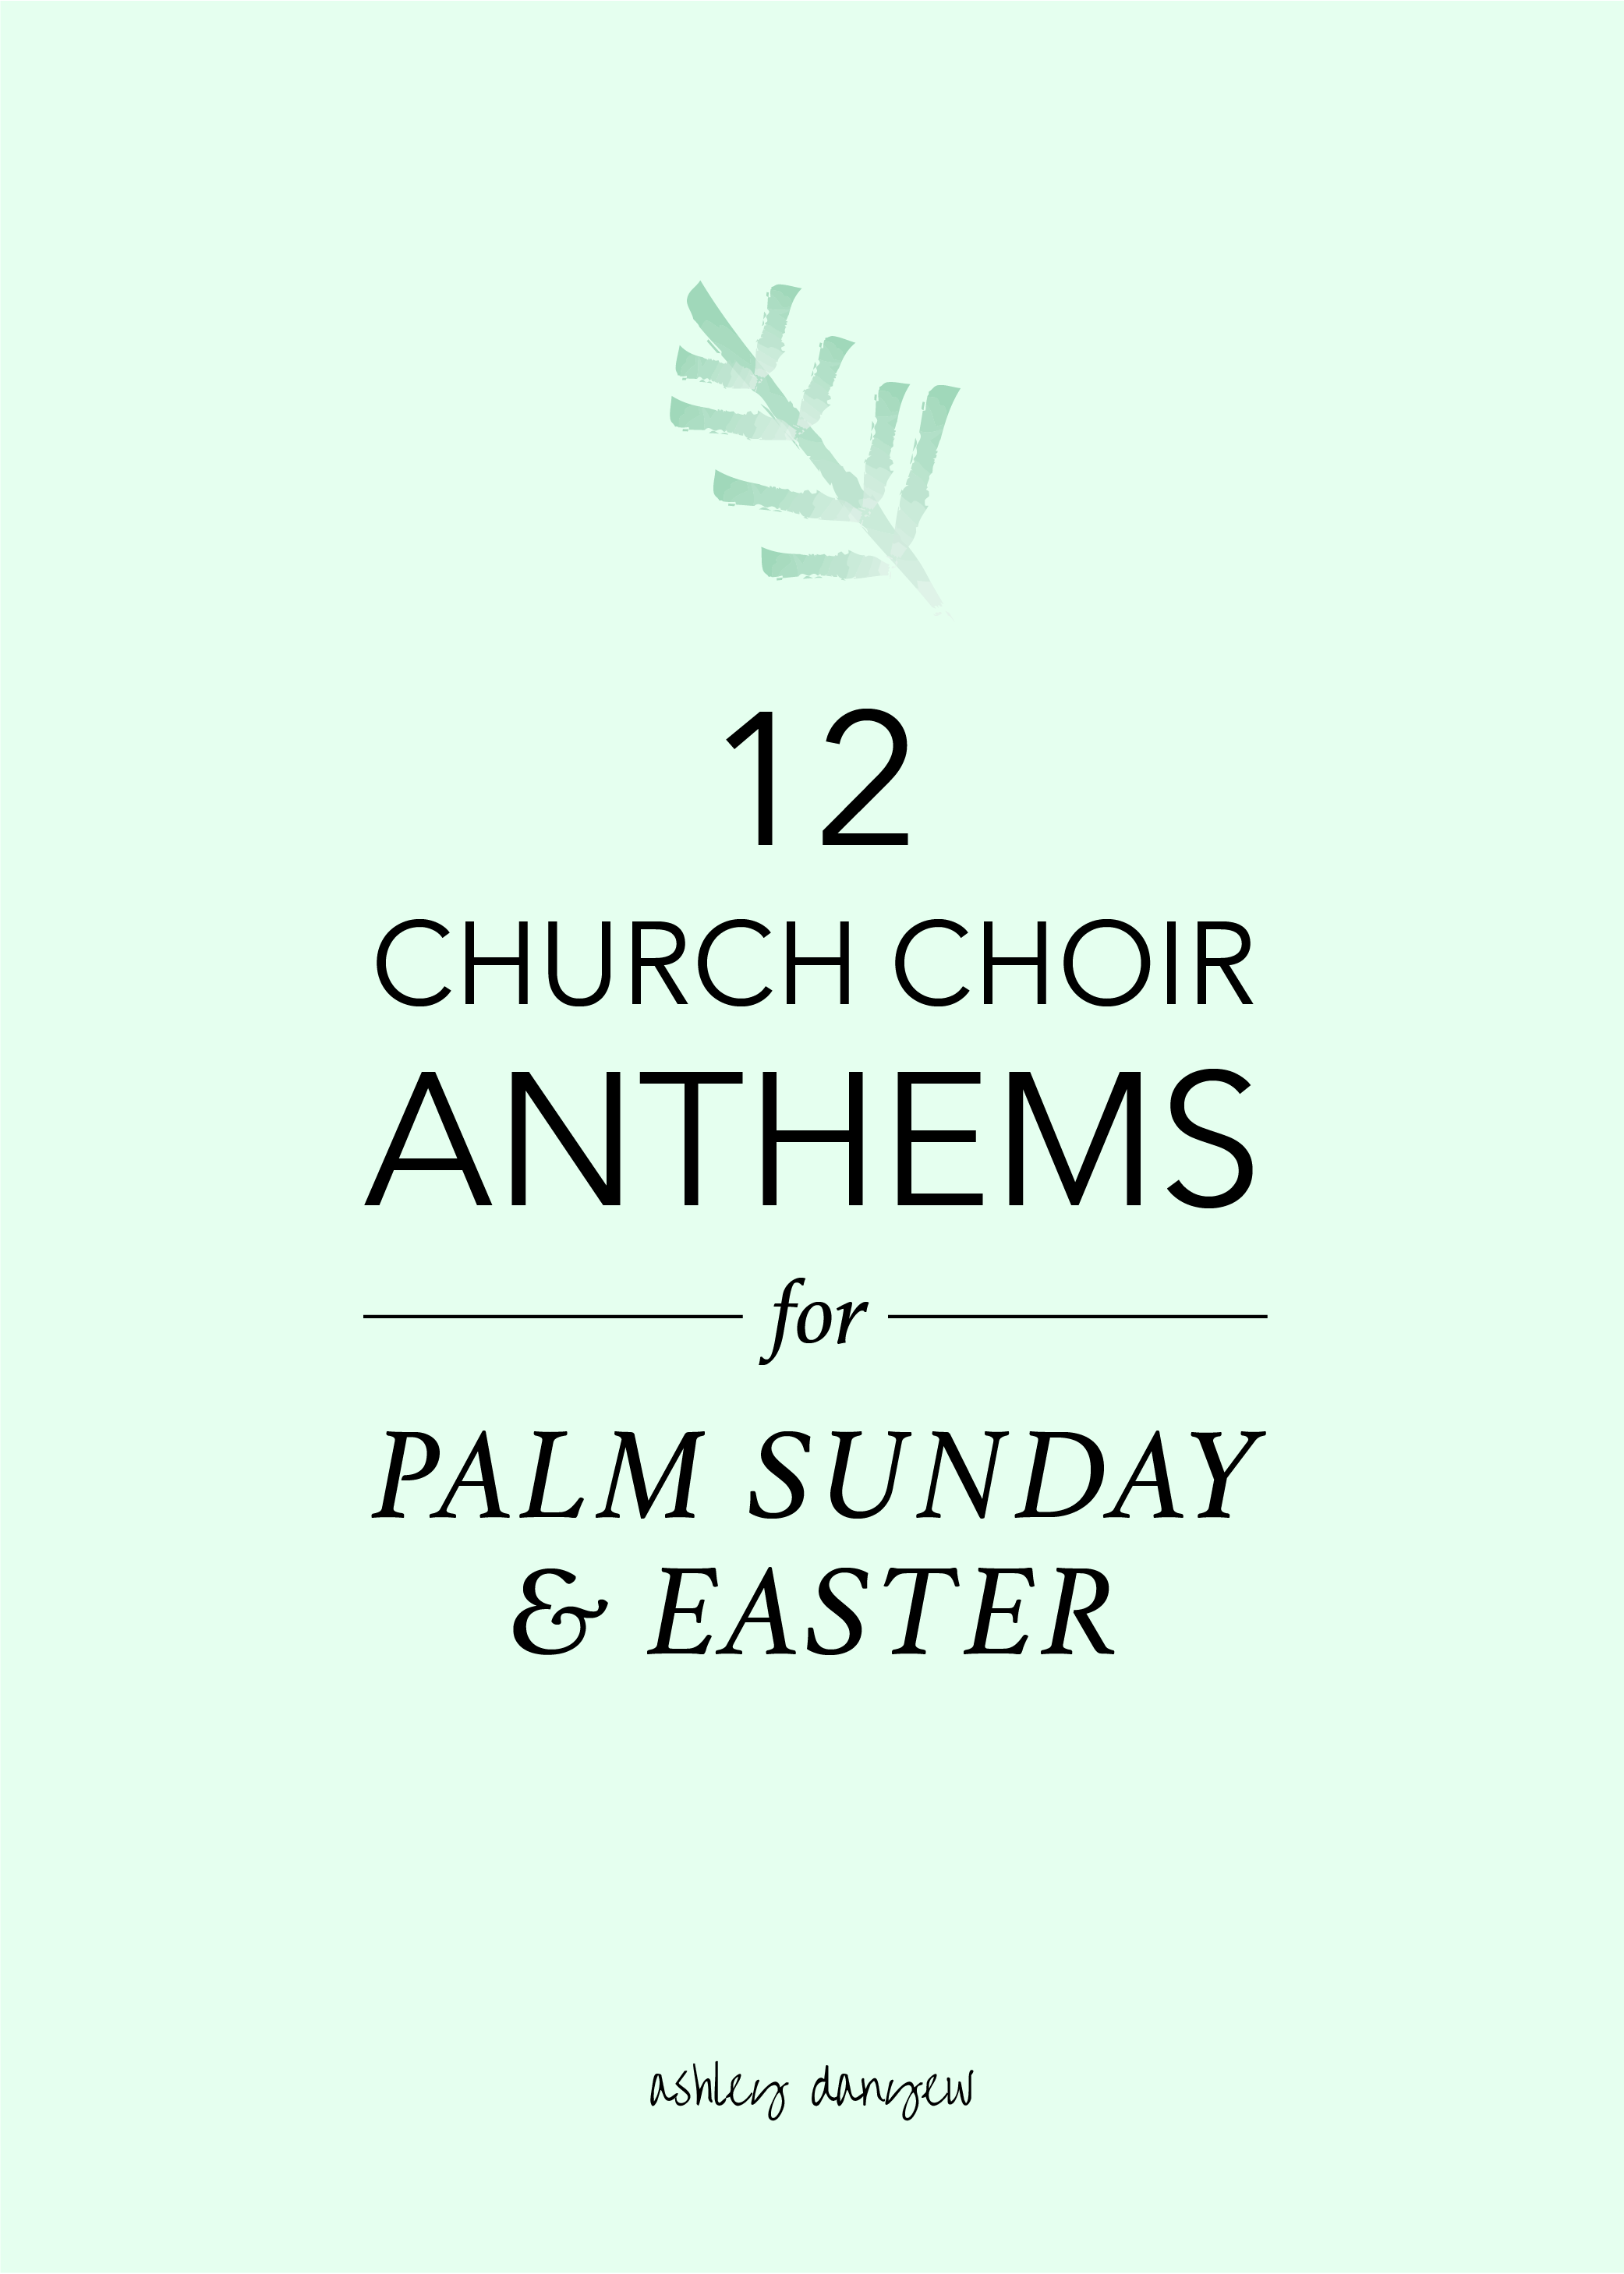 12 Church Choir Anthems for Palm Sunday and Easter-01.png